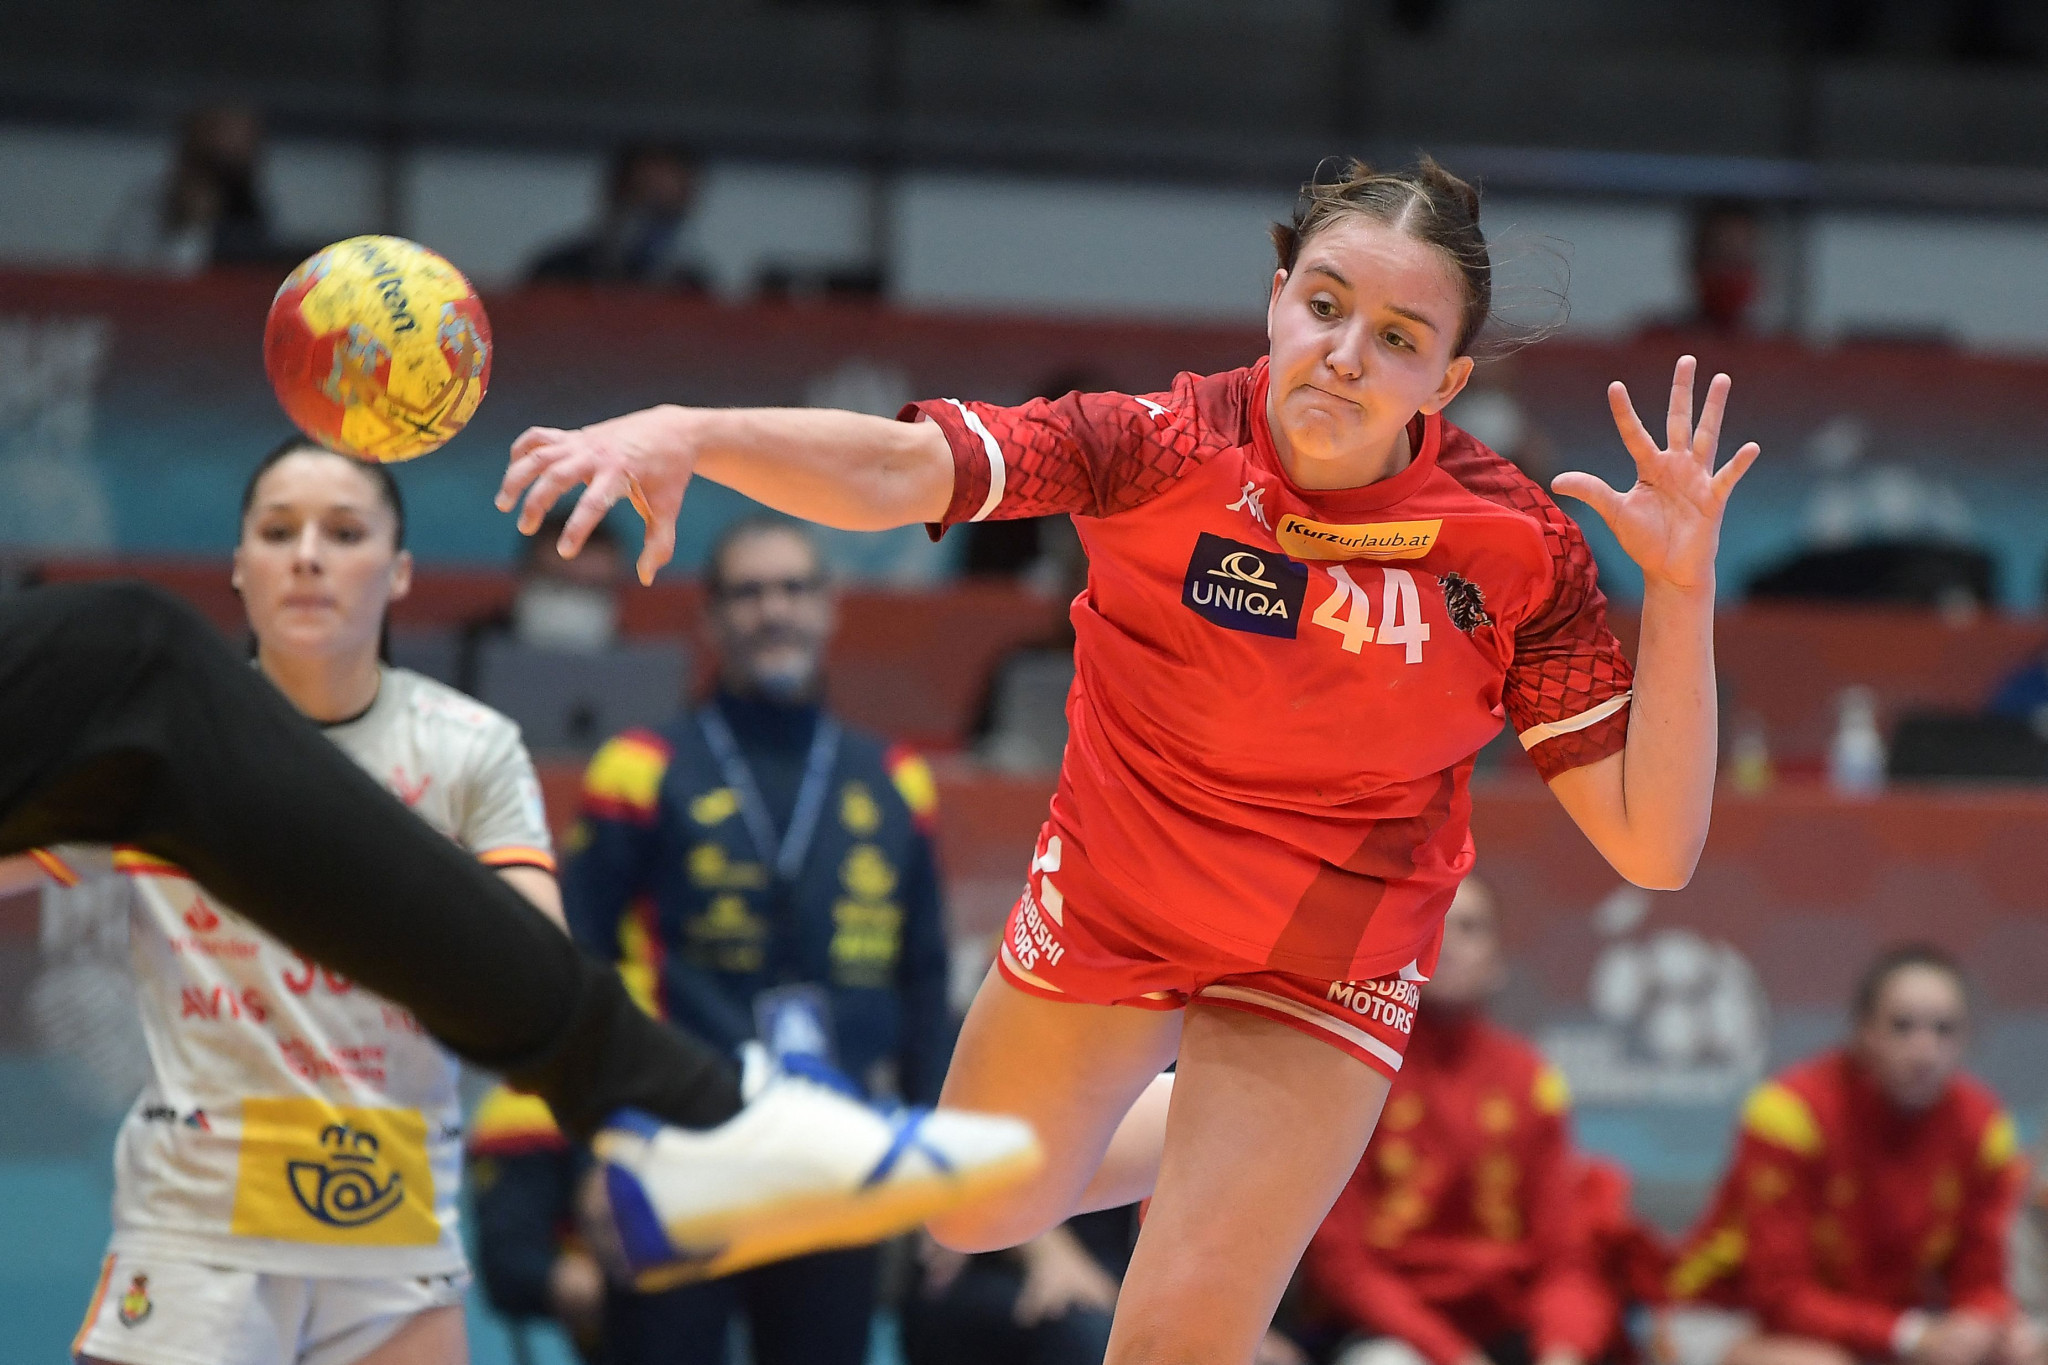 Hosts Spain defeat Brazil to top Group 4 at IHF Women's World Championship